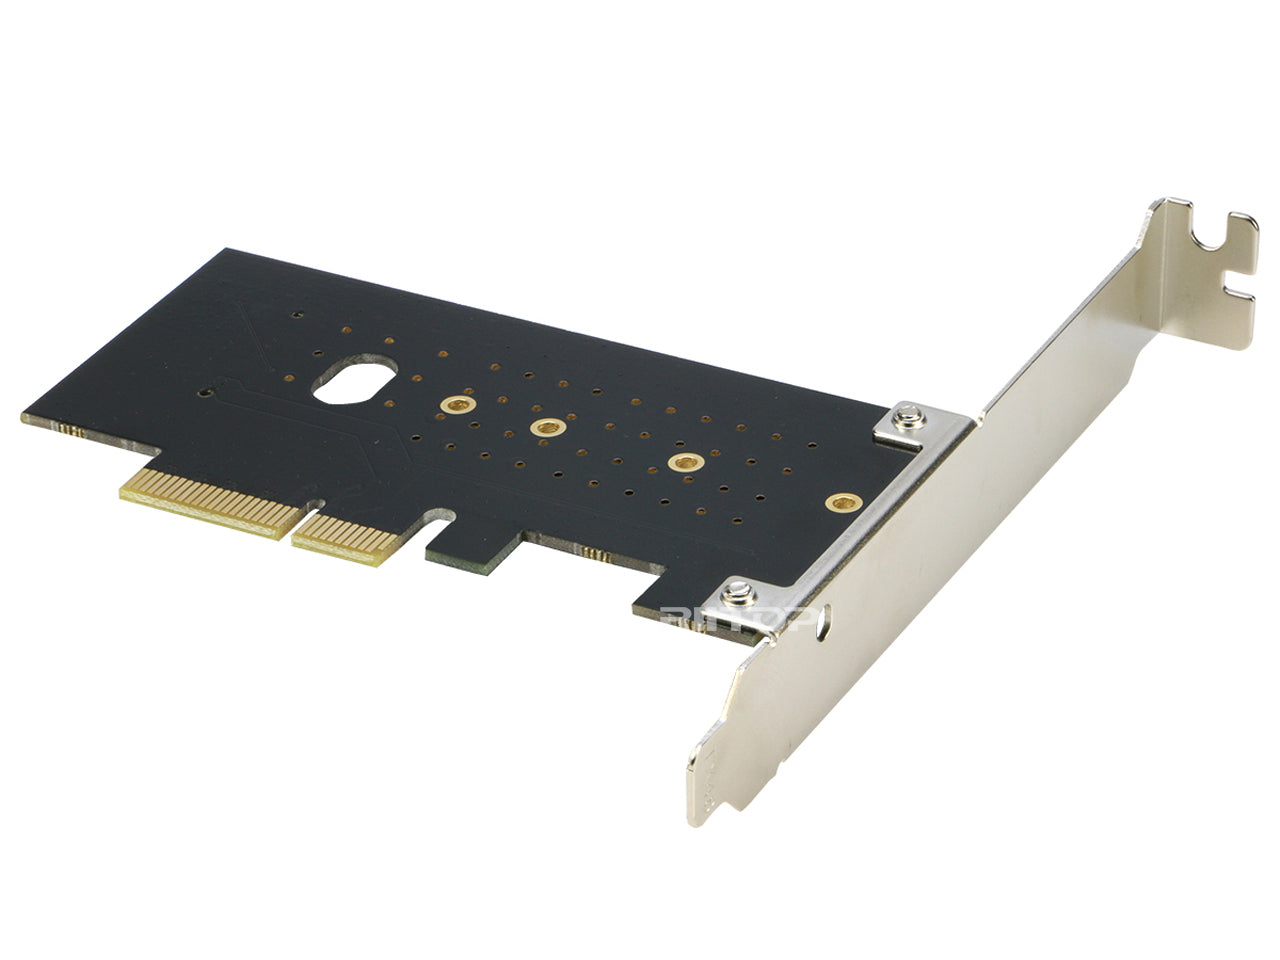 Dual M.2 to PCIe Adapter, RIITOP M.2 NVMe SSD to PCIe Adapter & NGFF (